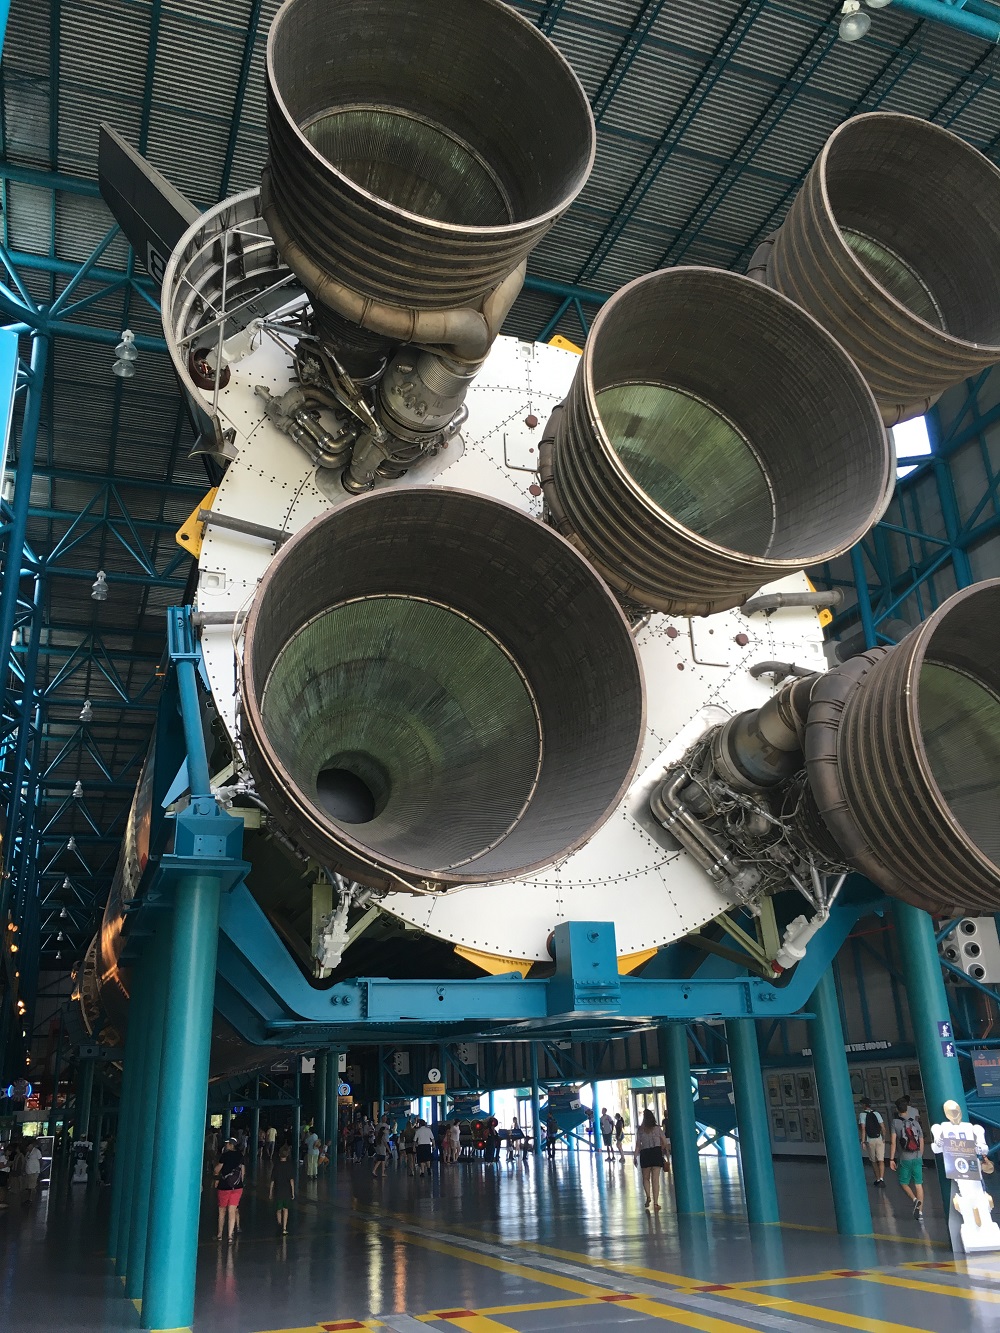 Saturn V – The rocket that sent us to the moon